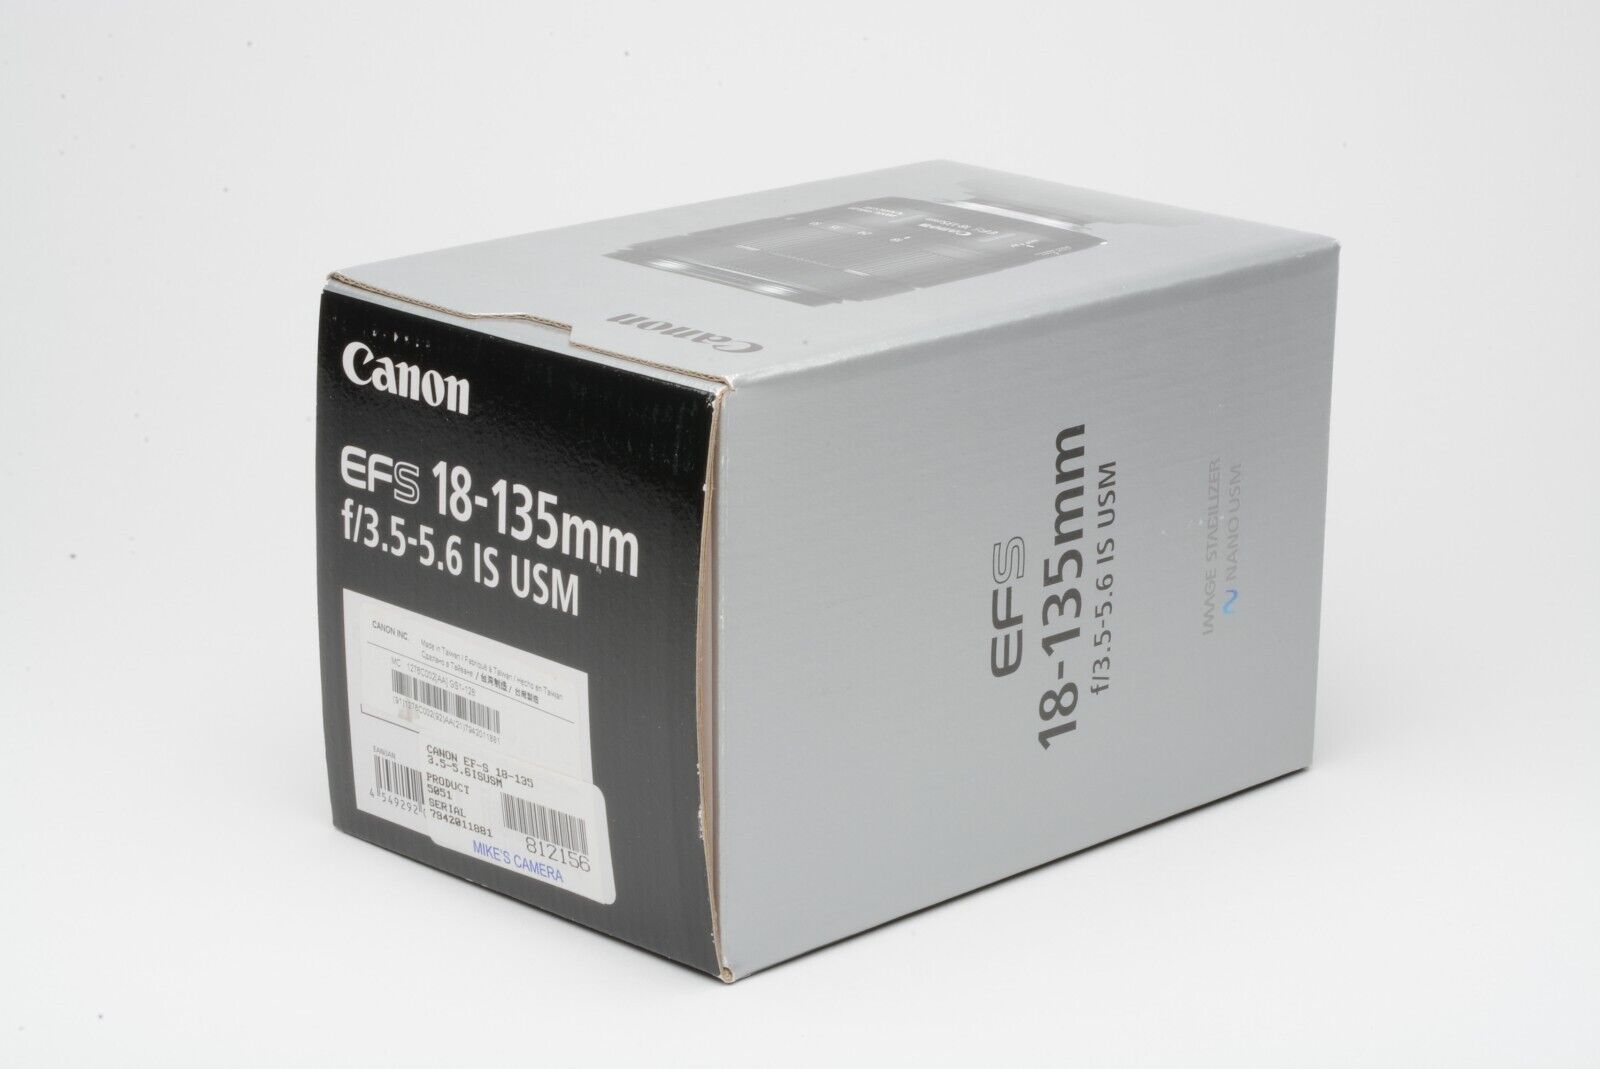 Canon EFS 18-135mm f3.5-5.6 IS USM zoom lens